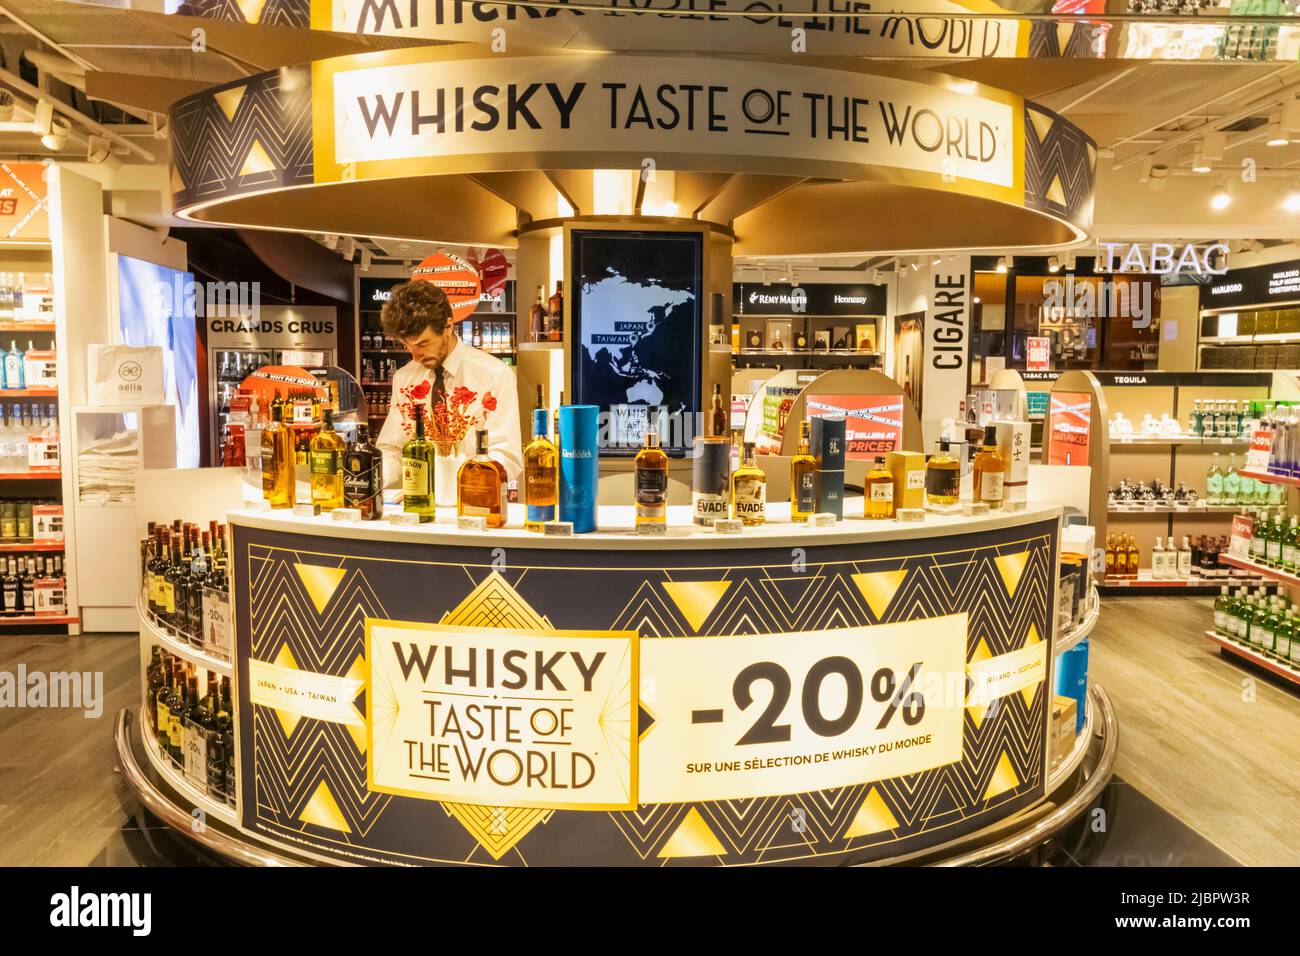 France, French Riviera, Cote d'Azur, Nice, Nice Cote d'Azur Airport, Duty Free Shop Promoting Whisky from Around the World Stock Photo